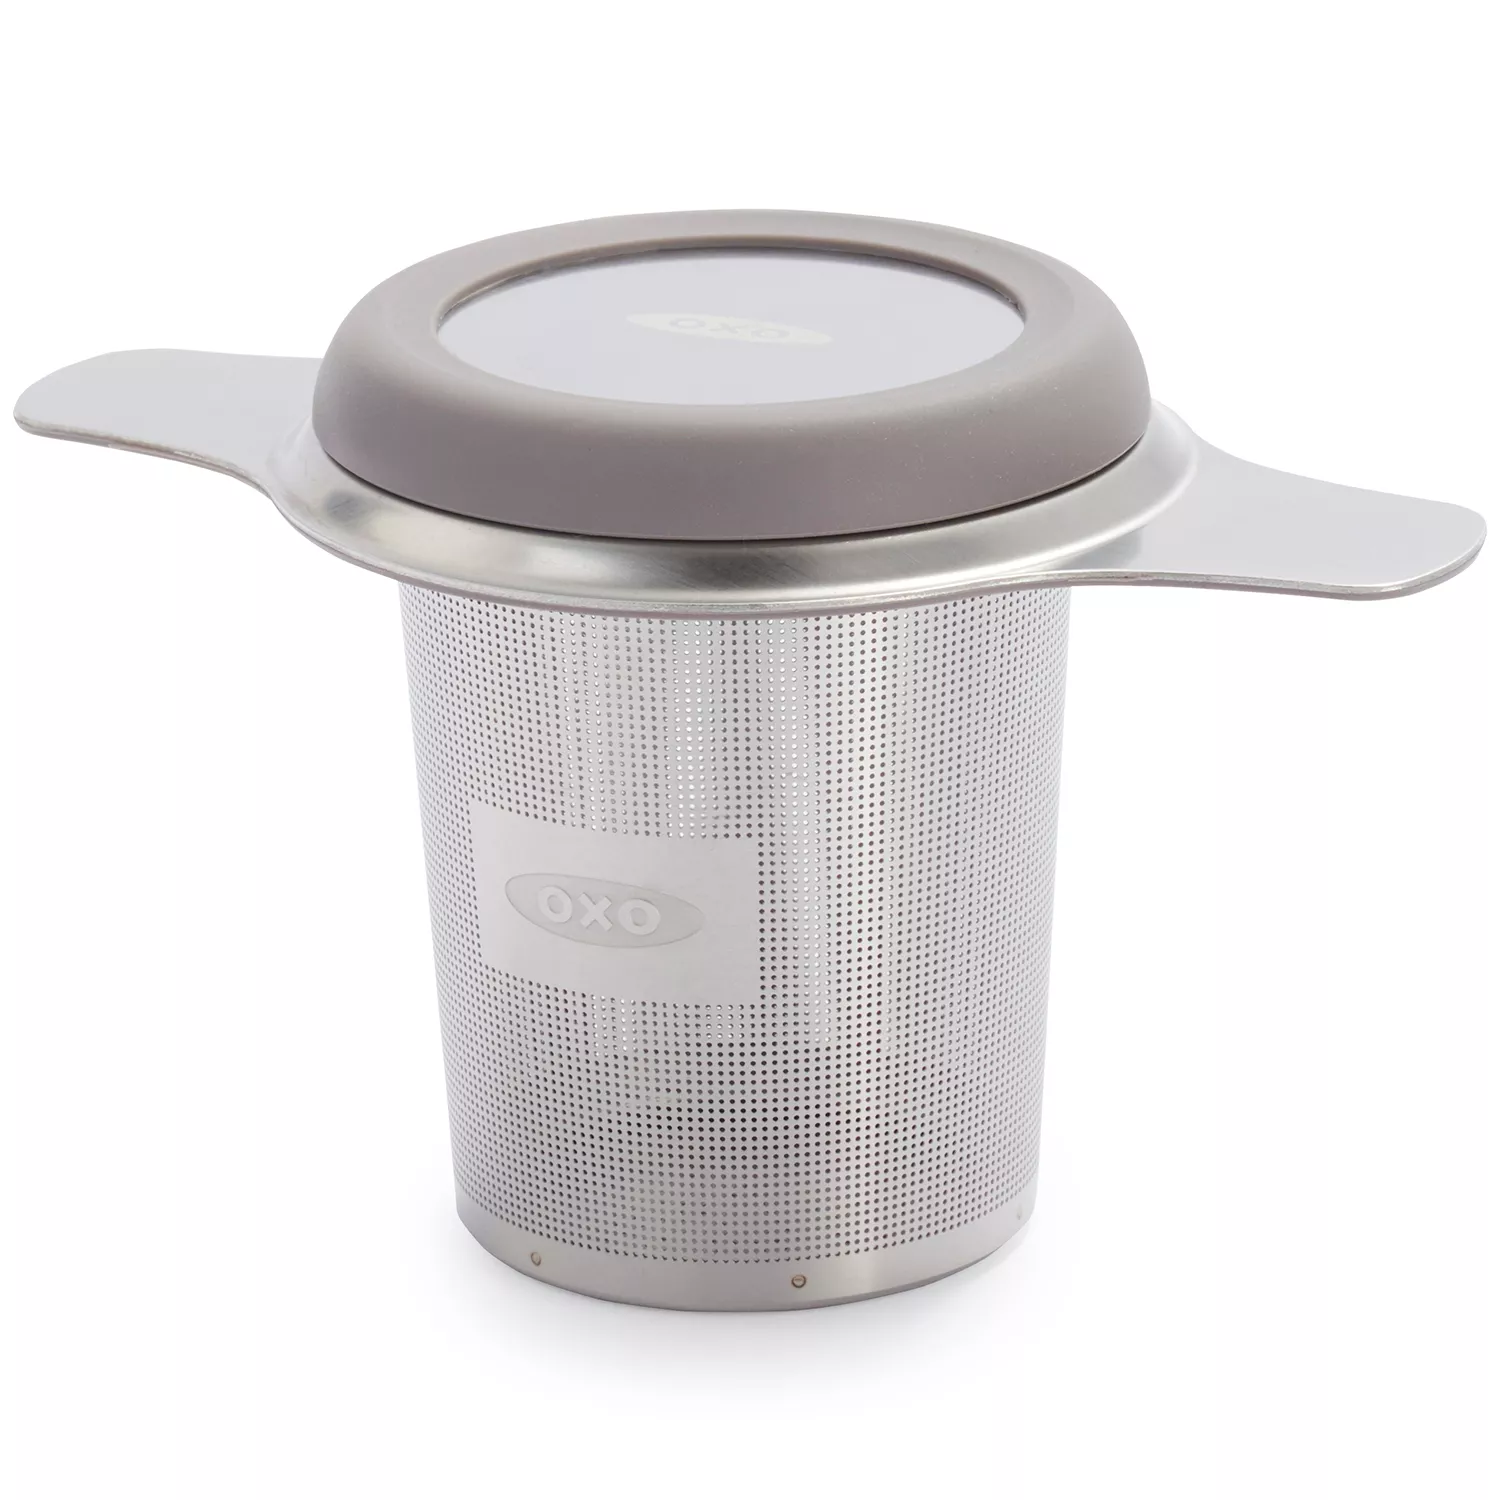 The Egg Stainless Steel Tea Ball Infuser with Drip Tray